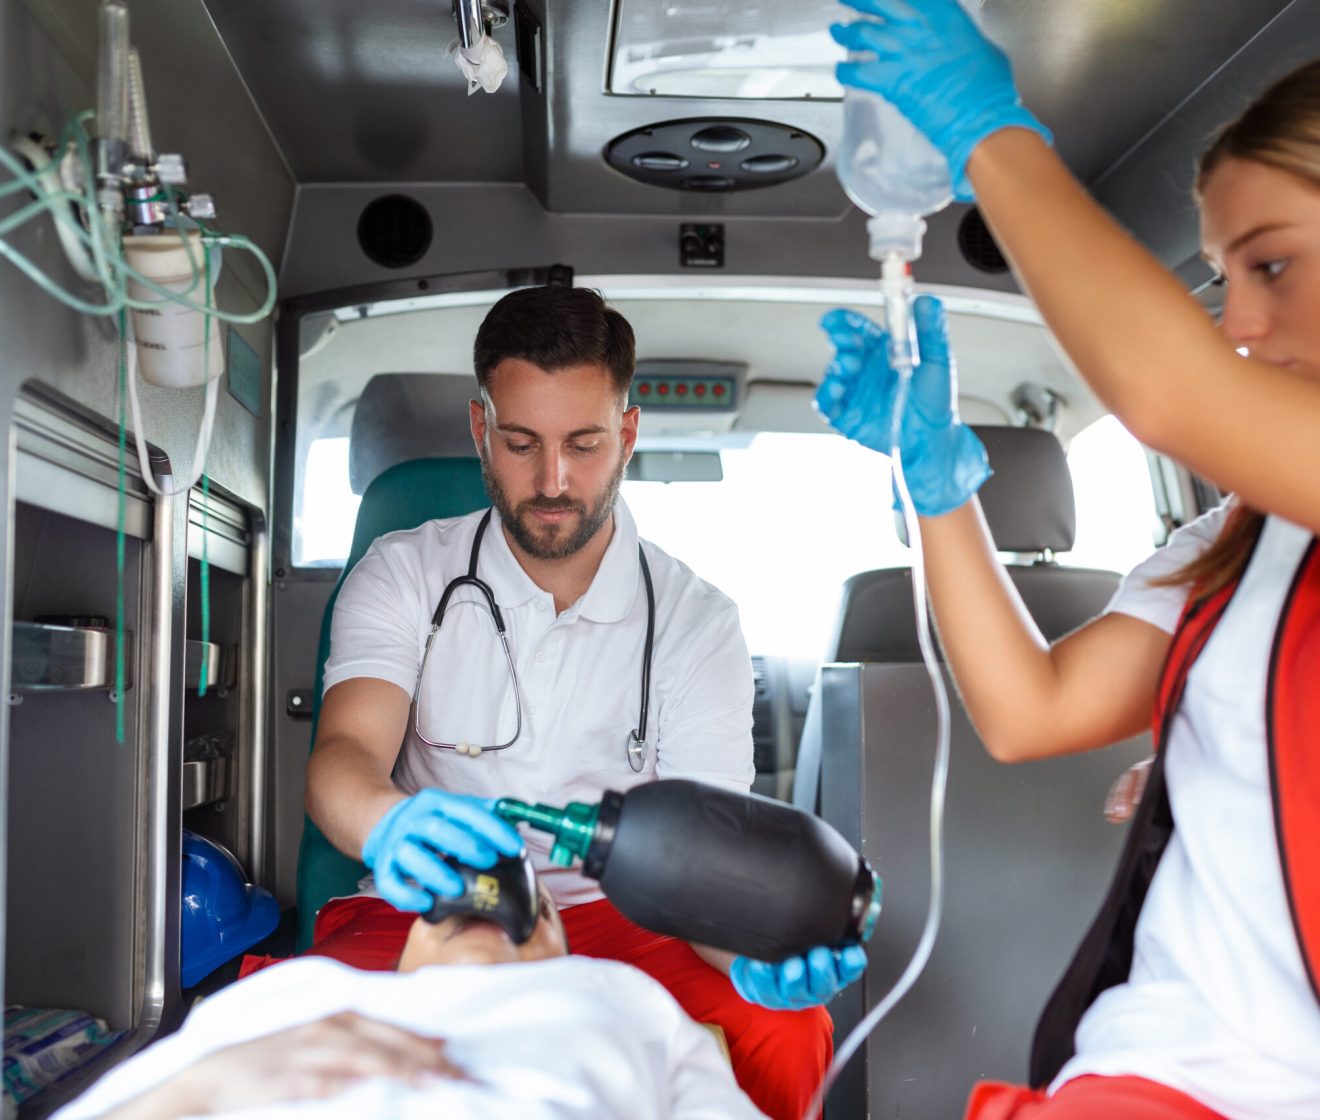 View from inside ambulance of uniformed emergency services workers caring for patient on stretcher during coronavirus pandemic.